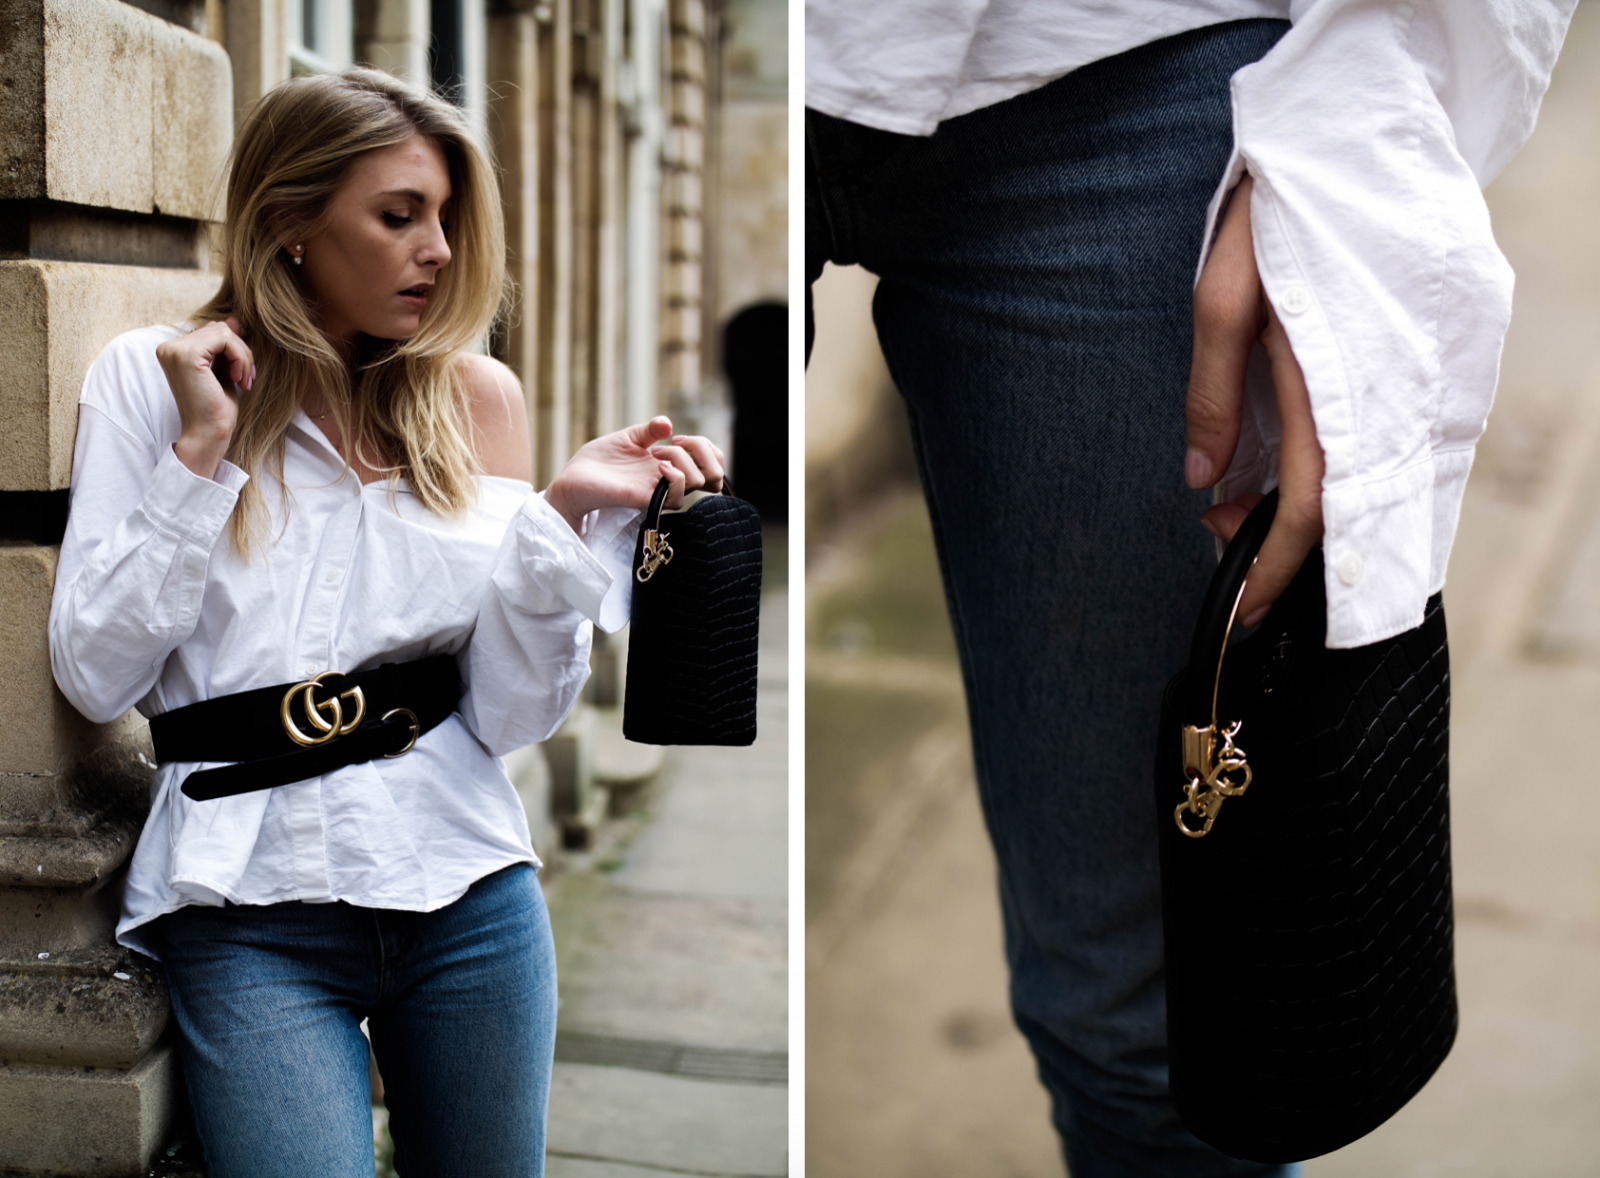 The New Way To Wear Your Statement Belt - White Shirt Styling